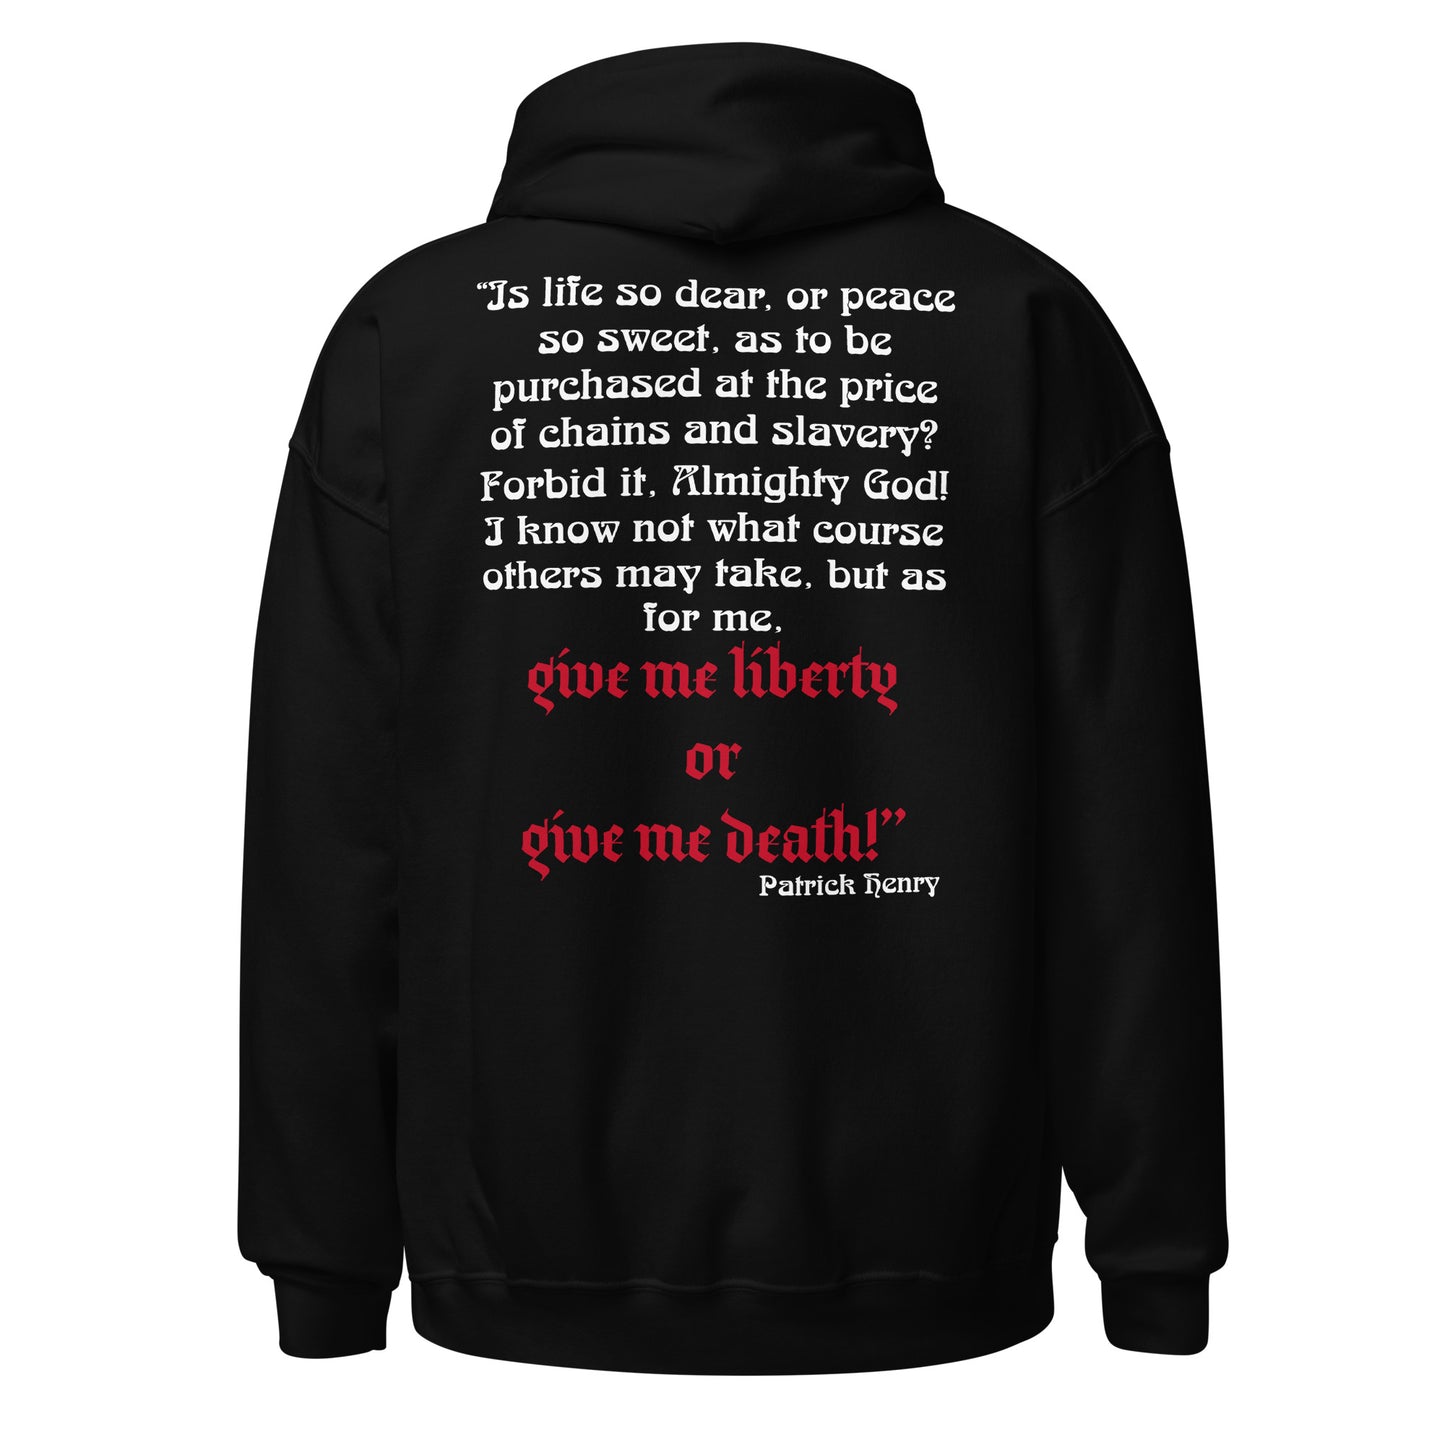 I Will Not Comply Hoodie